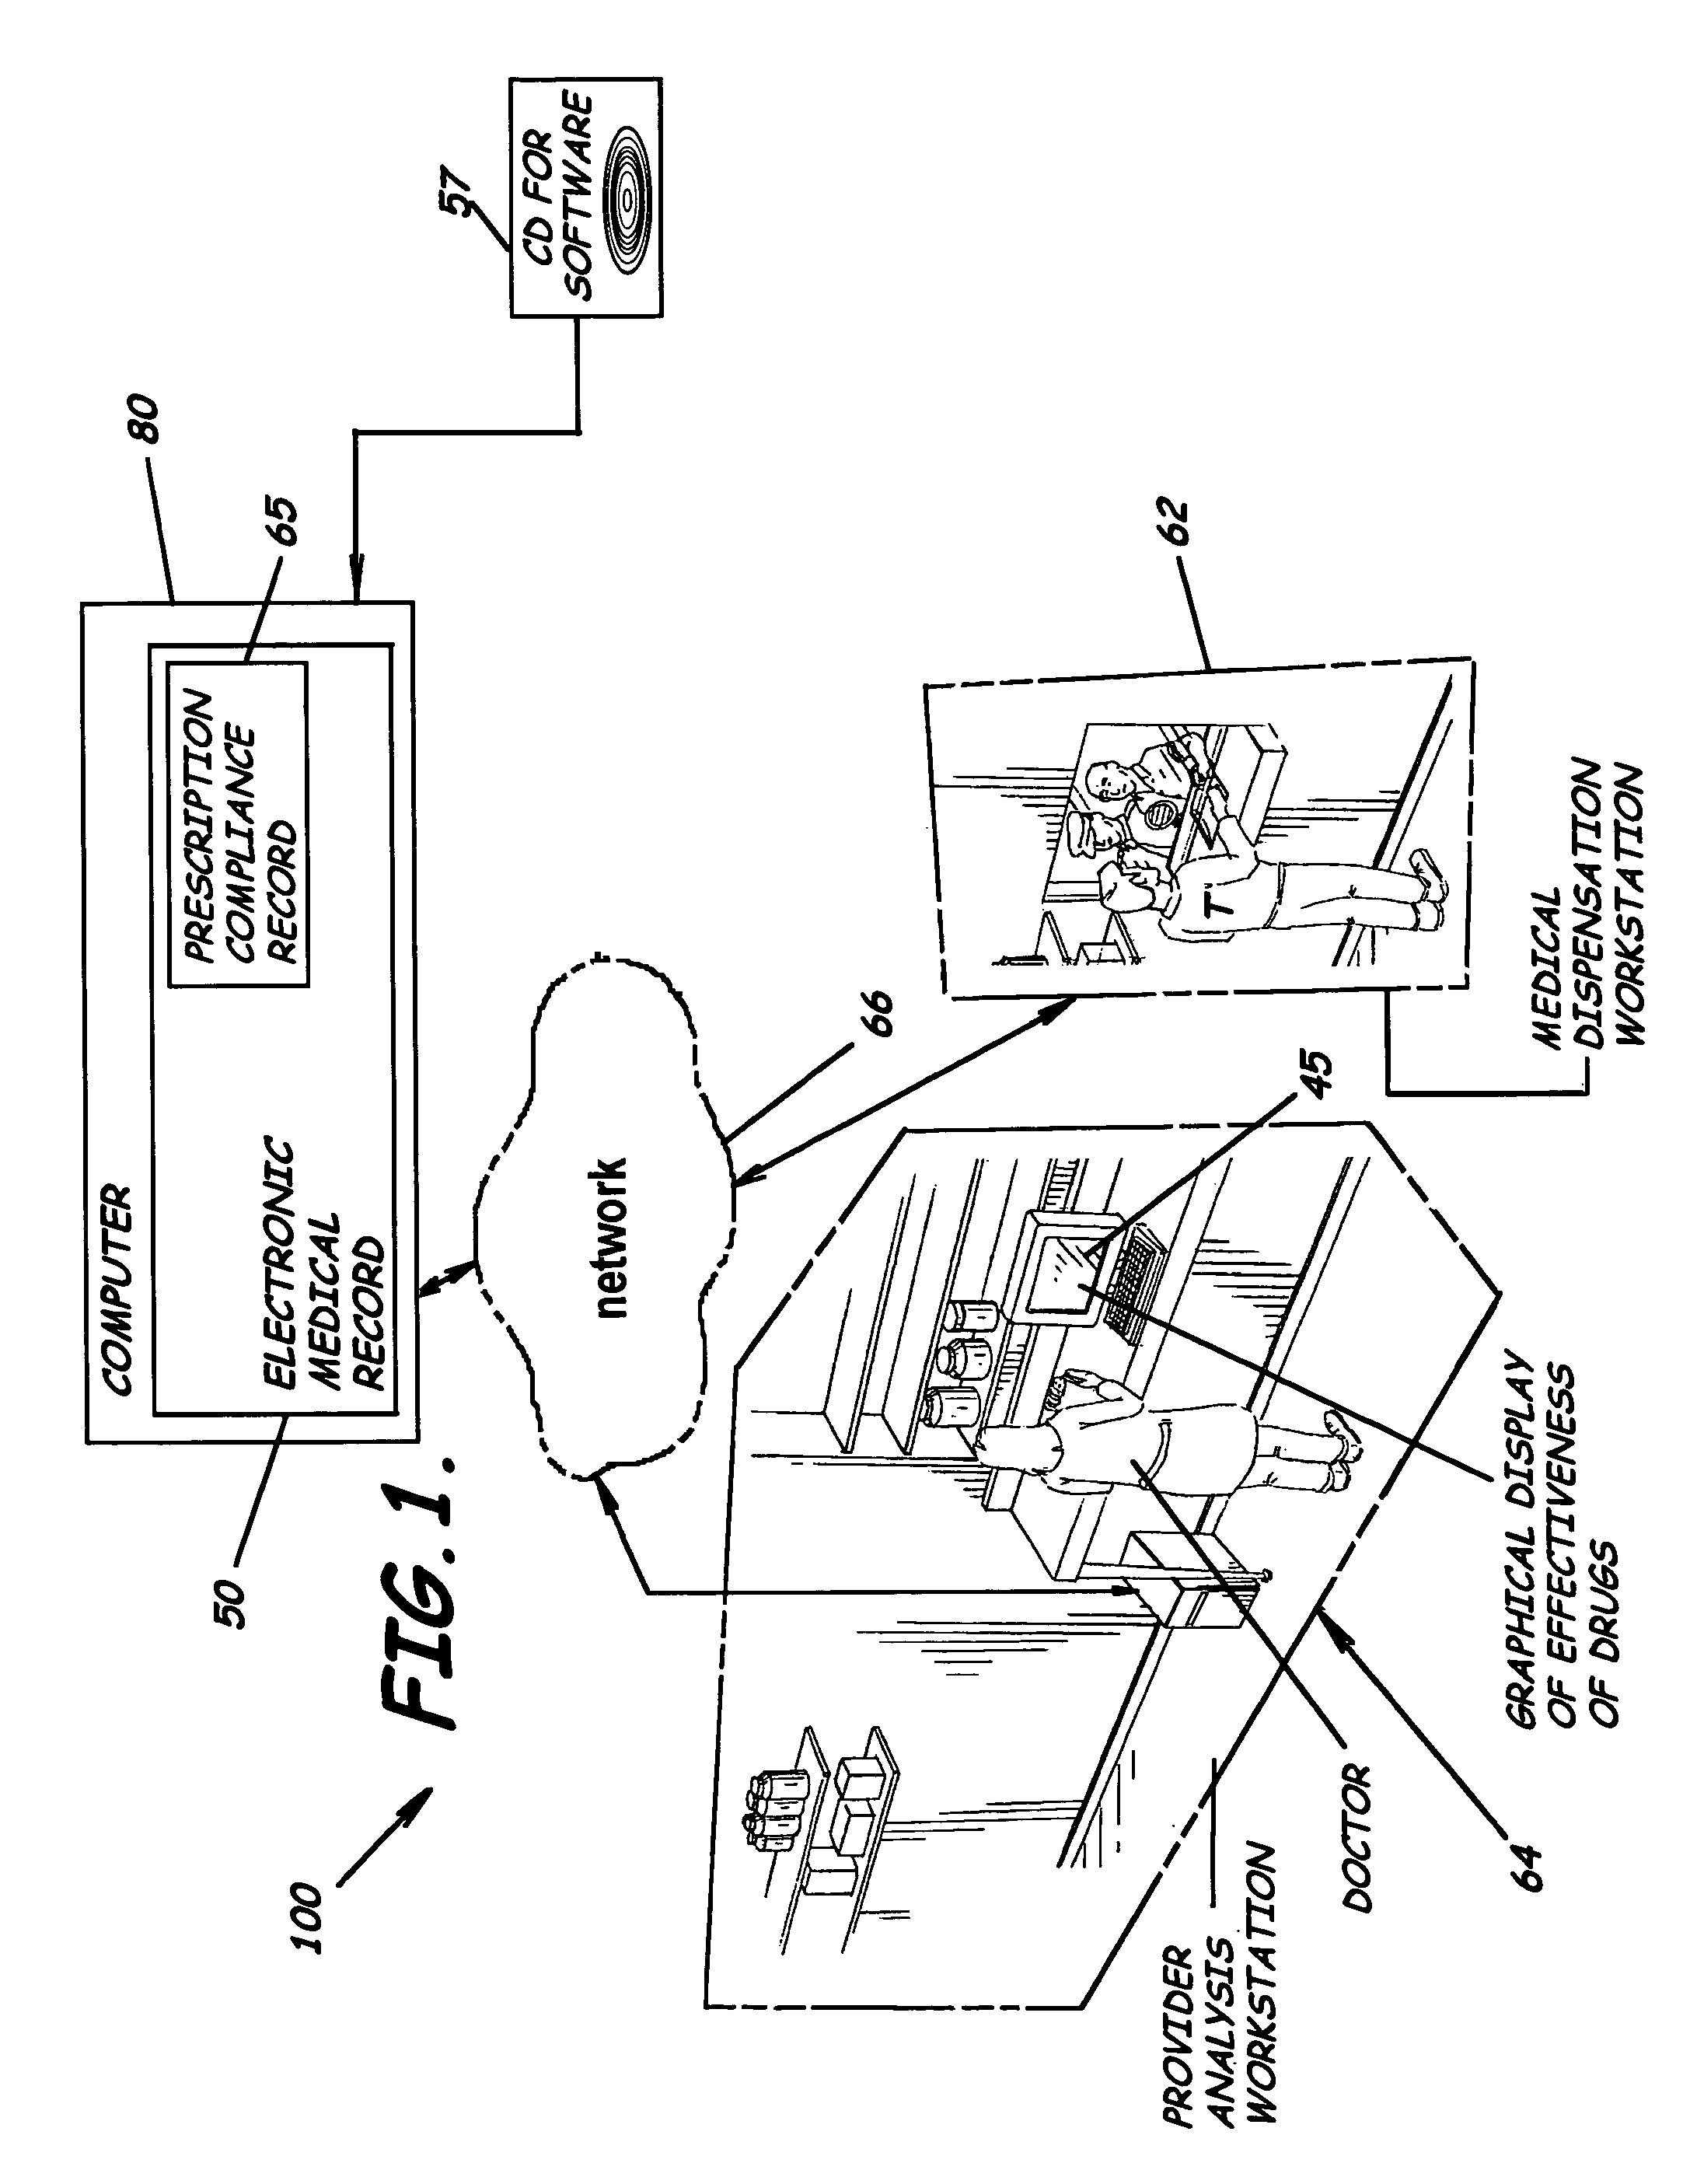 Pharmaceutical treatment effectiveness analysis computer system and methods